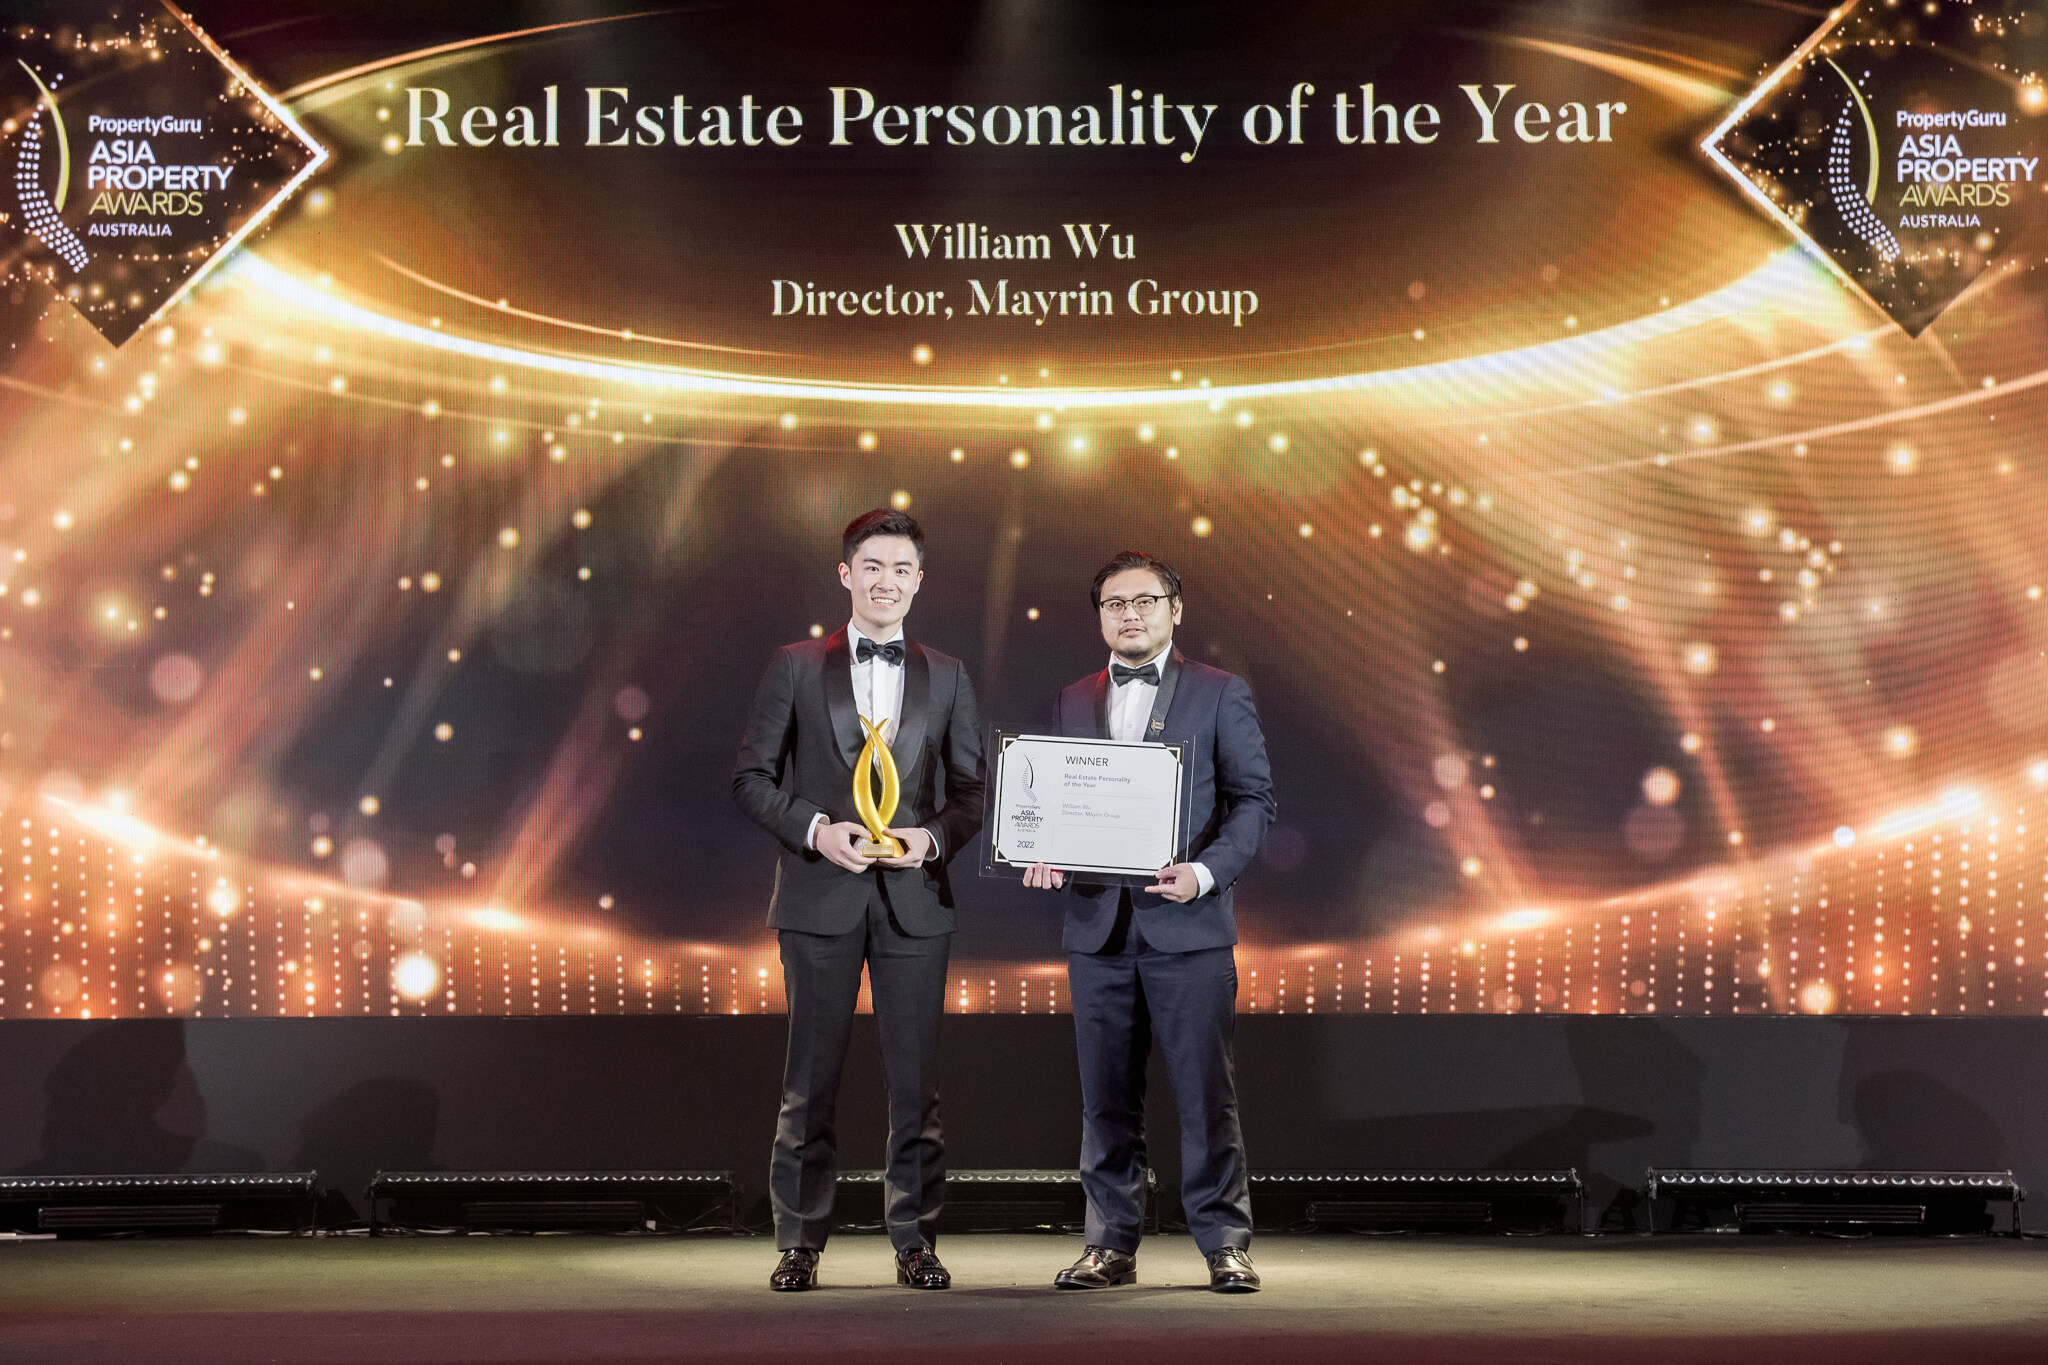 3 Real Estate Personality of the Year.jpg